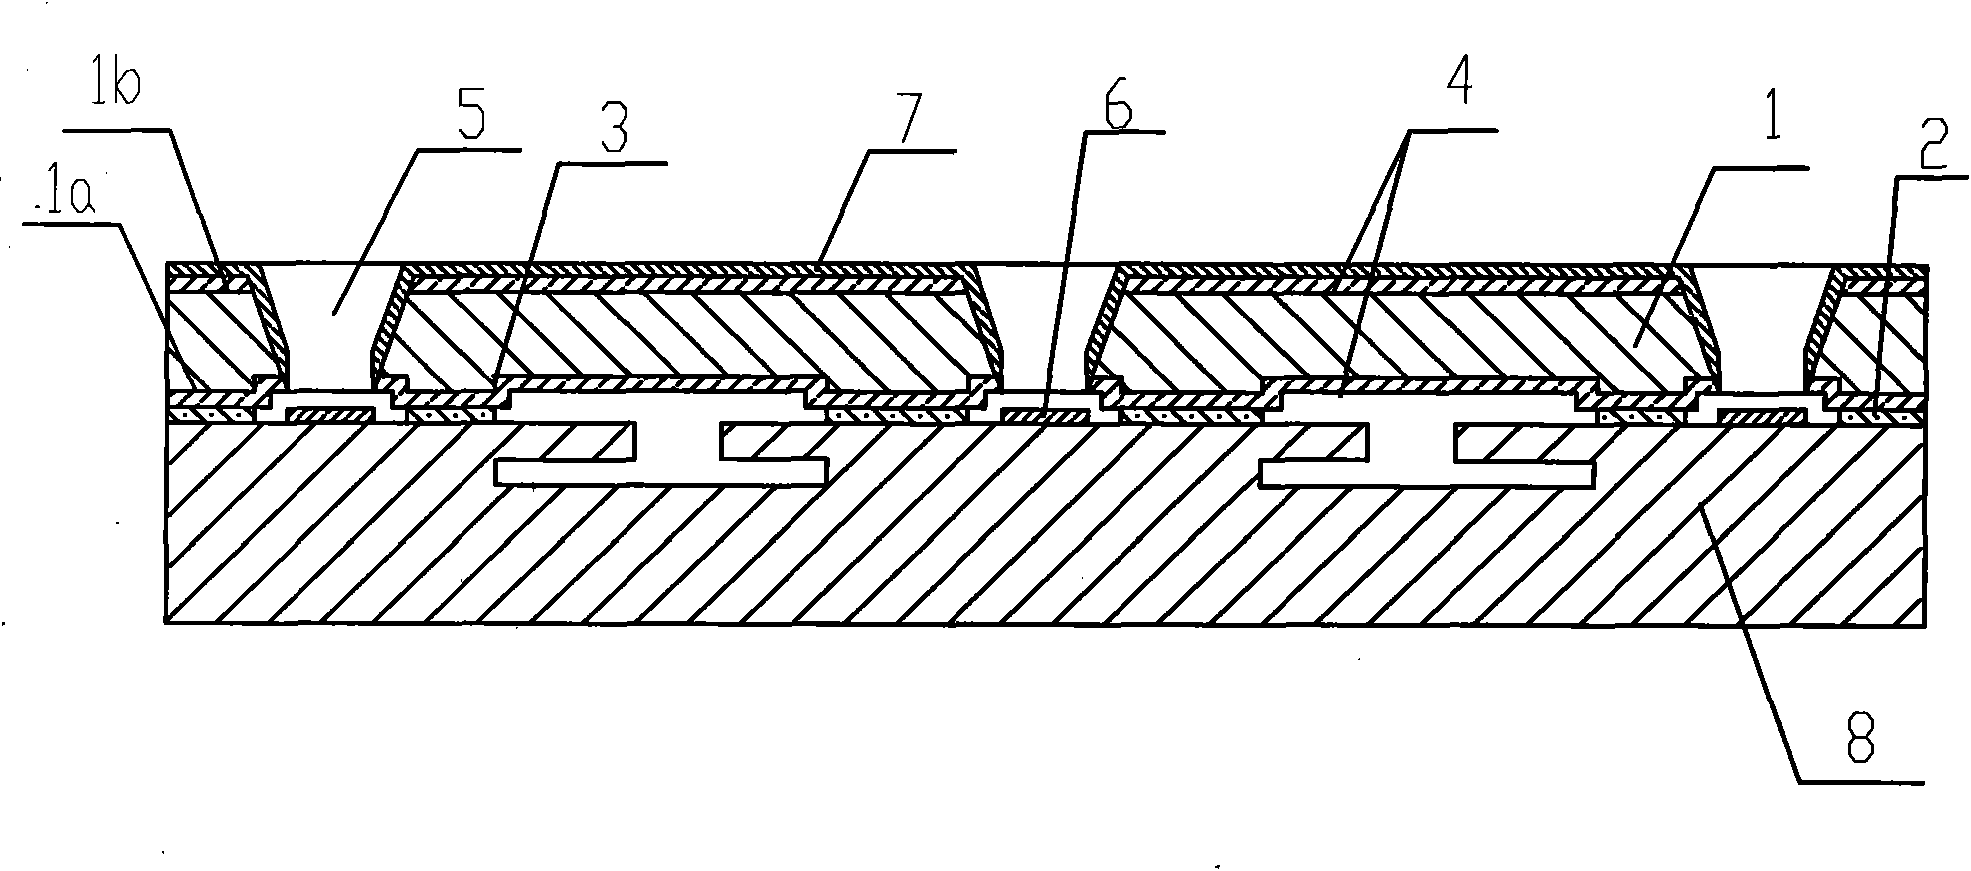 Wafer level vacuum packaging method of MEMS (Micro-electromechanical System) component